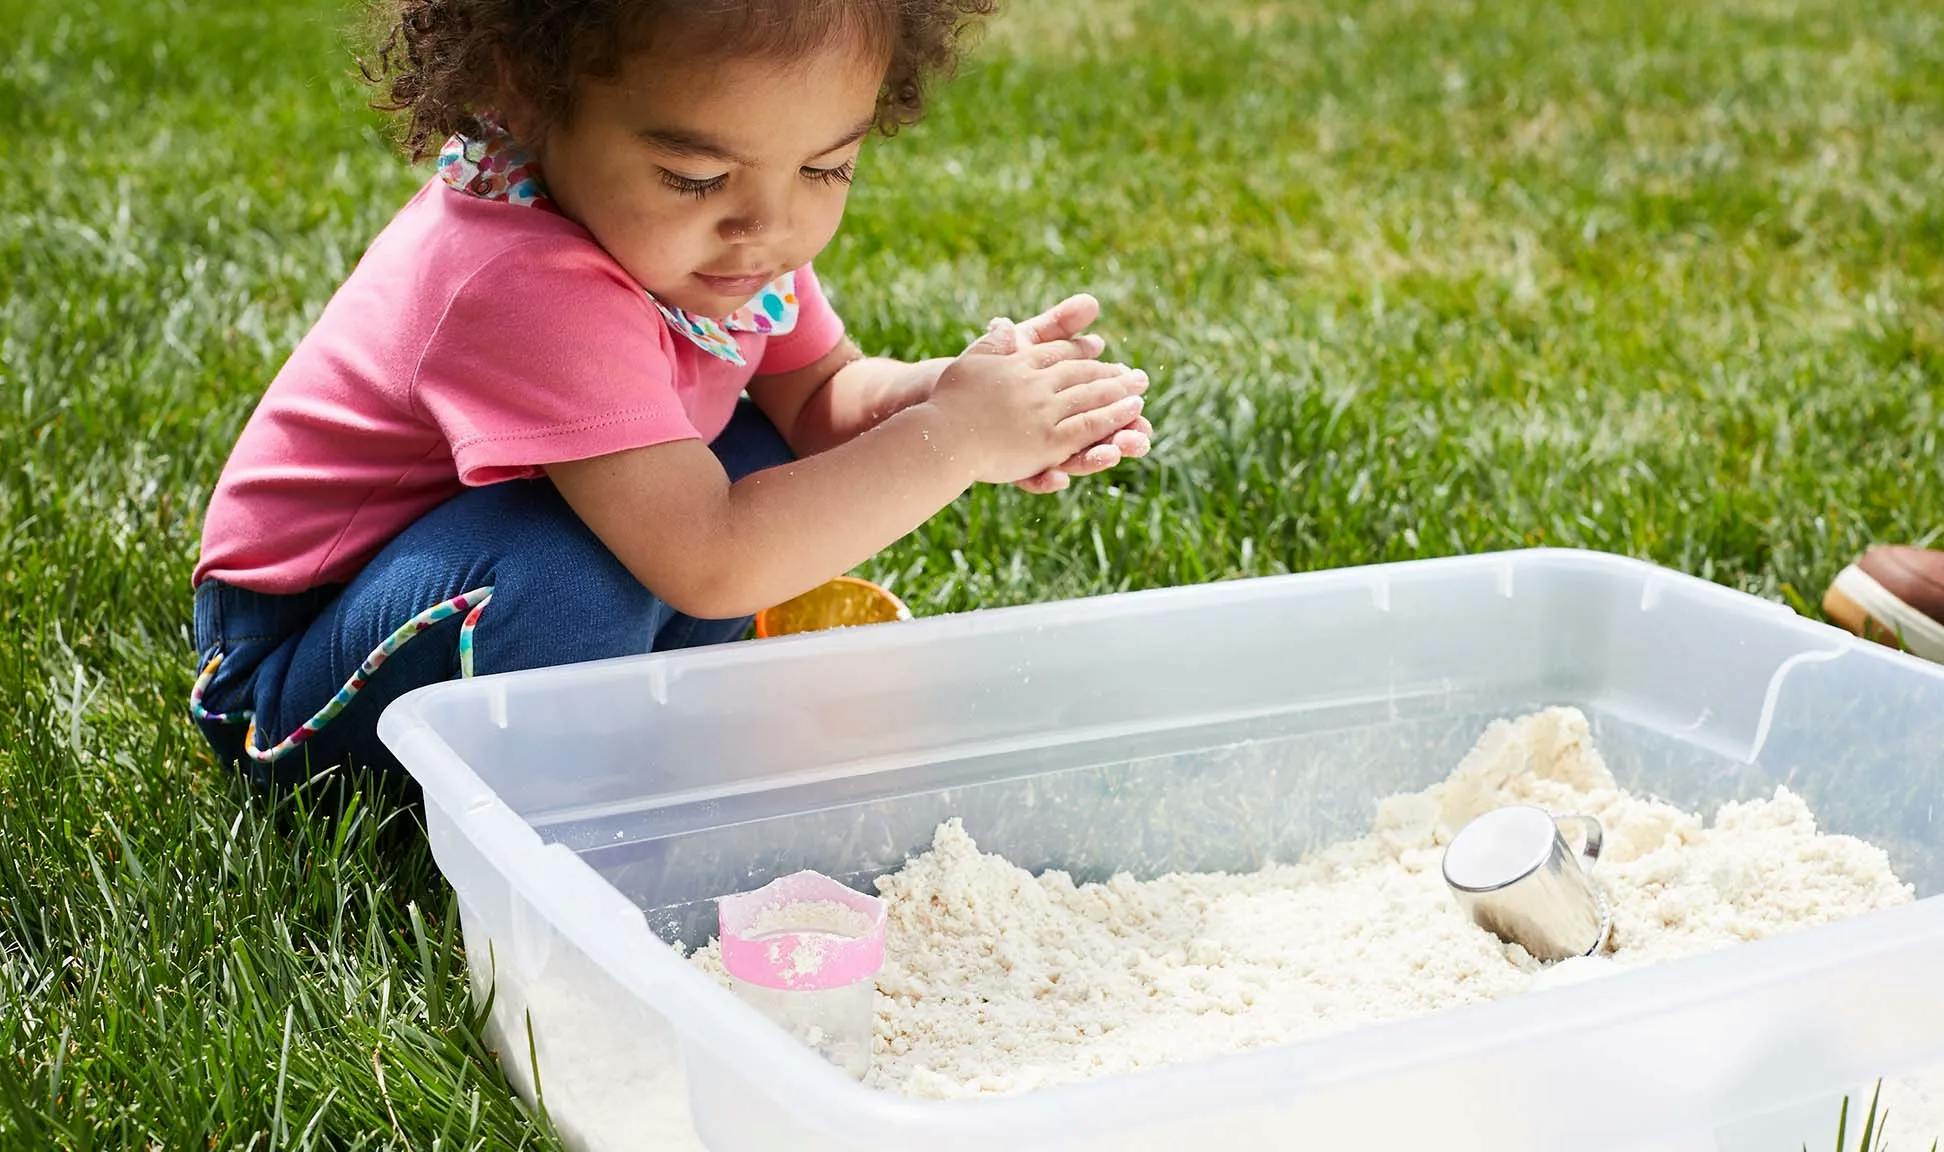 Child playing outside with sand